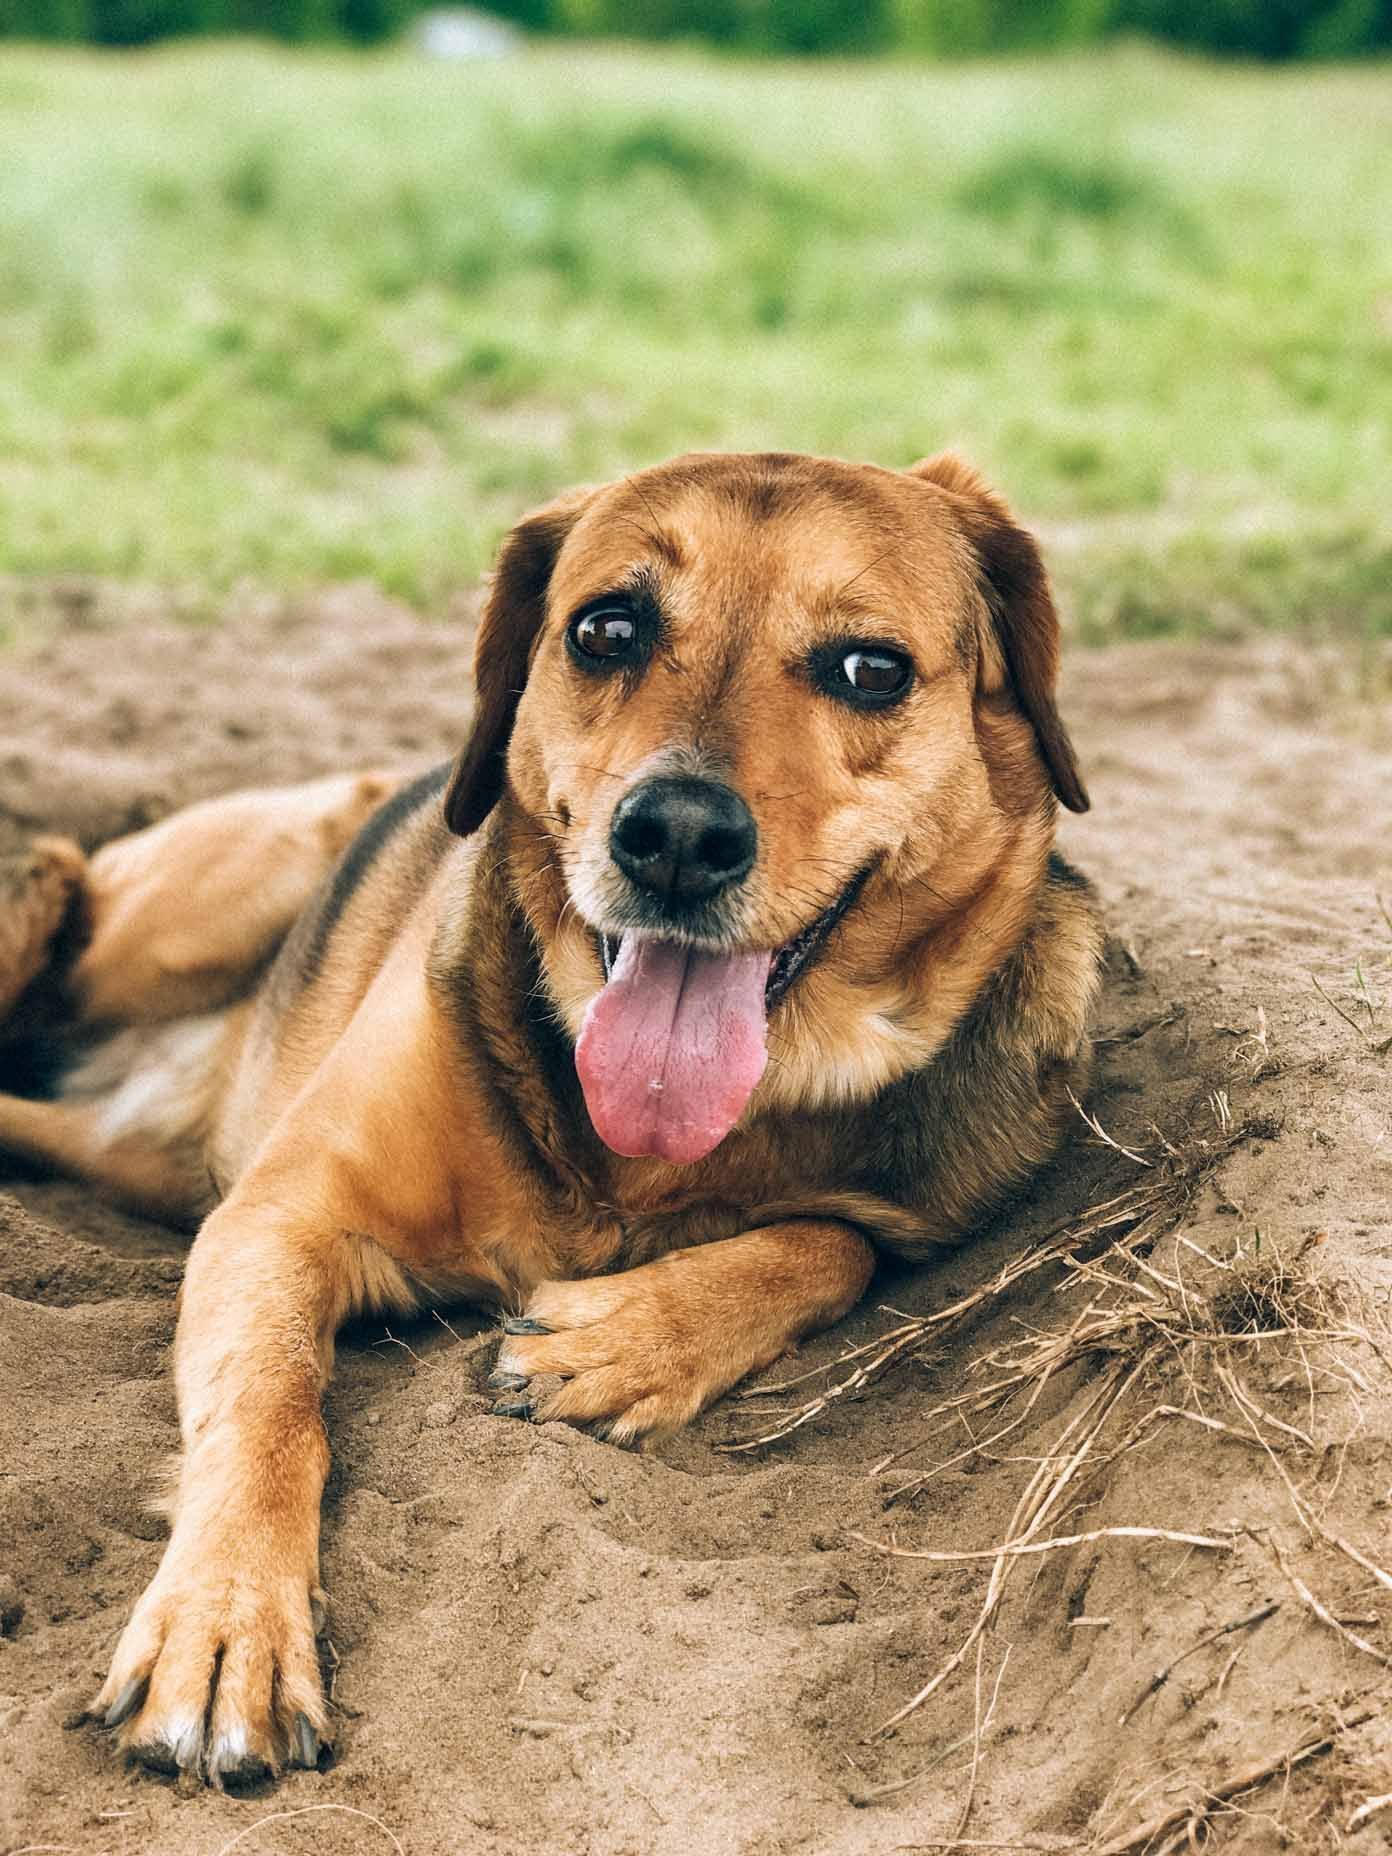 A brown dog lying on the ground with tongue hanging out.